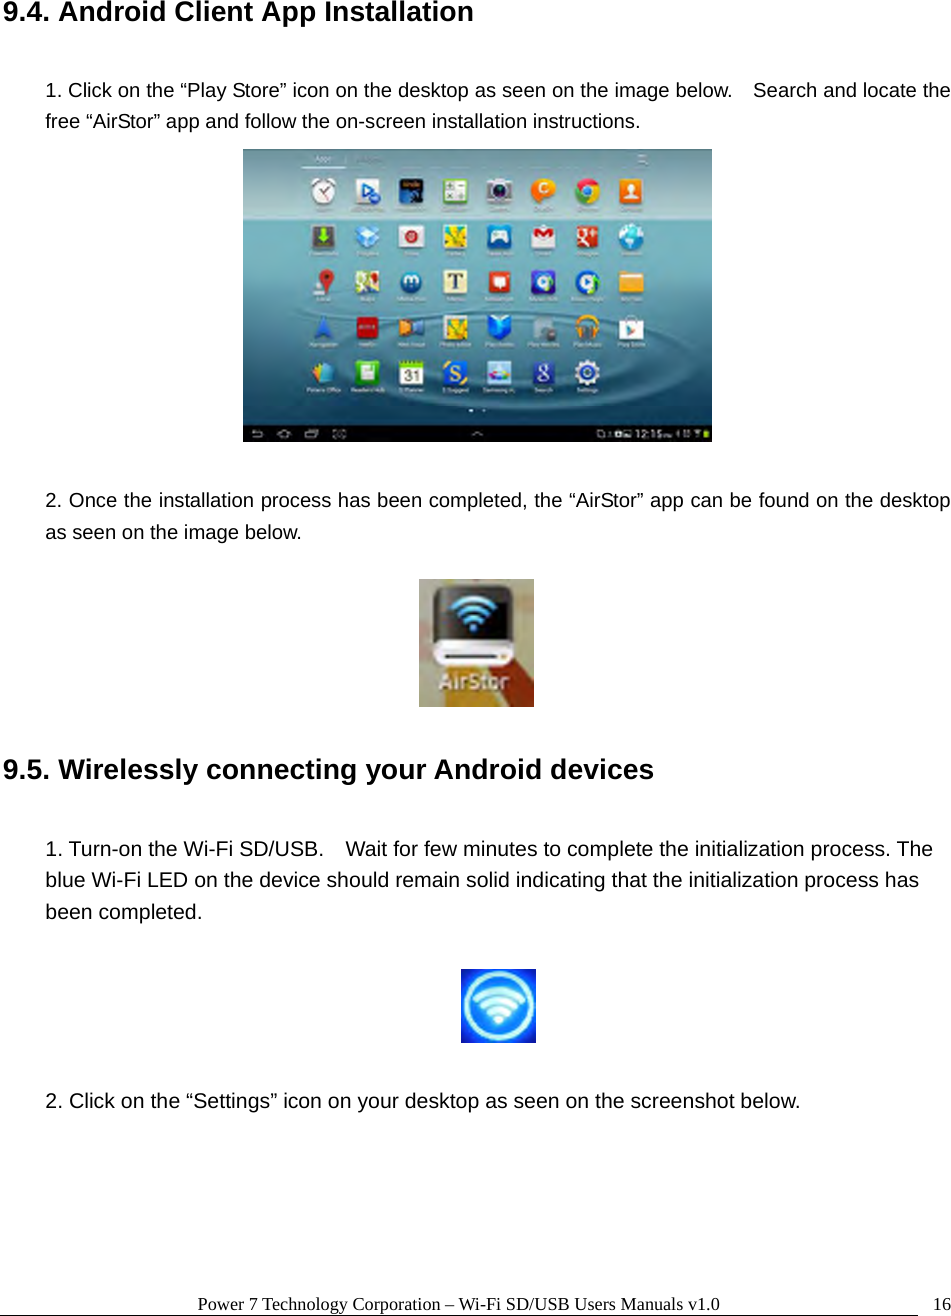 Power 7 Technology Corporation – Wi-Fi SD/USB Users Manuals v1.0  169.4. Android Client App Installation  1. Click on the “Play Store” icon on the desktop as seen on the image below.    Search and locate the free “AirStor” app and follow the on-screen installation instructions.   2. Once the installation process has been completed, the “AirStor” app can be found on the desktop as seen on the image below.    9.5. Wirelessly connecting your Android devices  1. Turn-on the Wi-Fi SD/USB.    Wait for few minutes to complete the initialization process. The blue Wi-Fi LED on the device should remain solid indicating that the initialization process has been completed.    2. Click on the “Settings” icon on your desktop as seen on the screenshot below.  